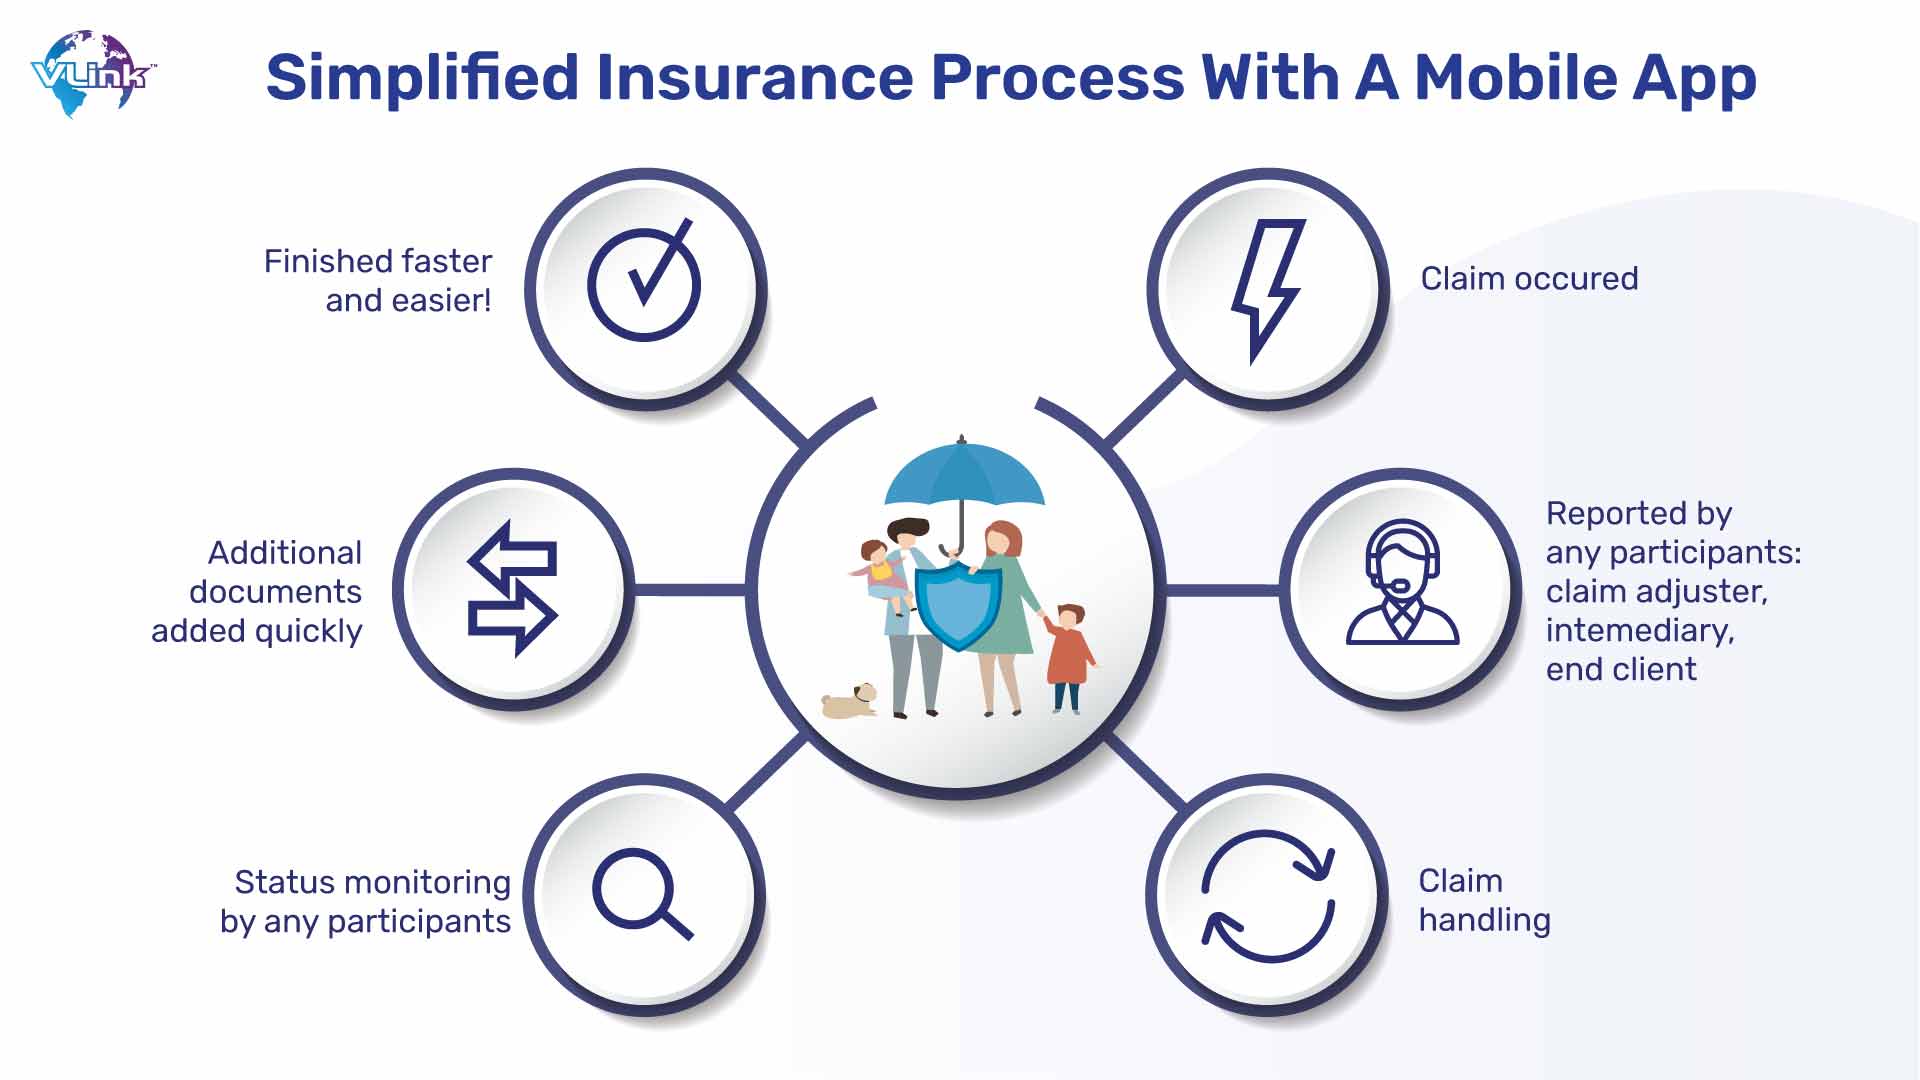 Simplified insurance process with a mobile app